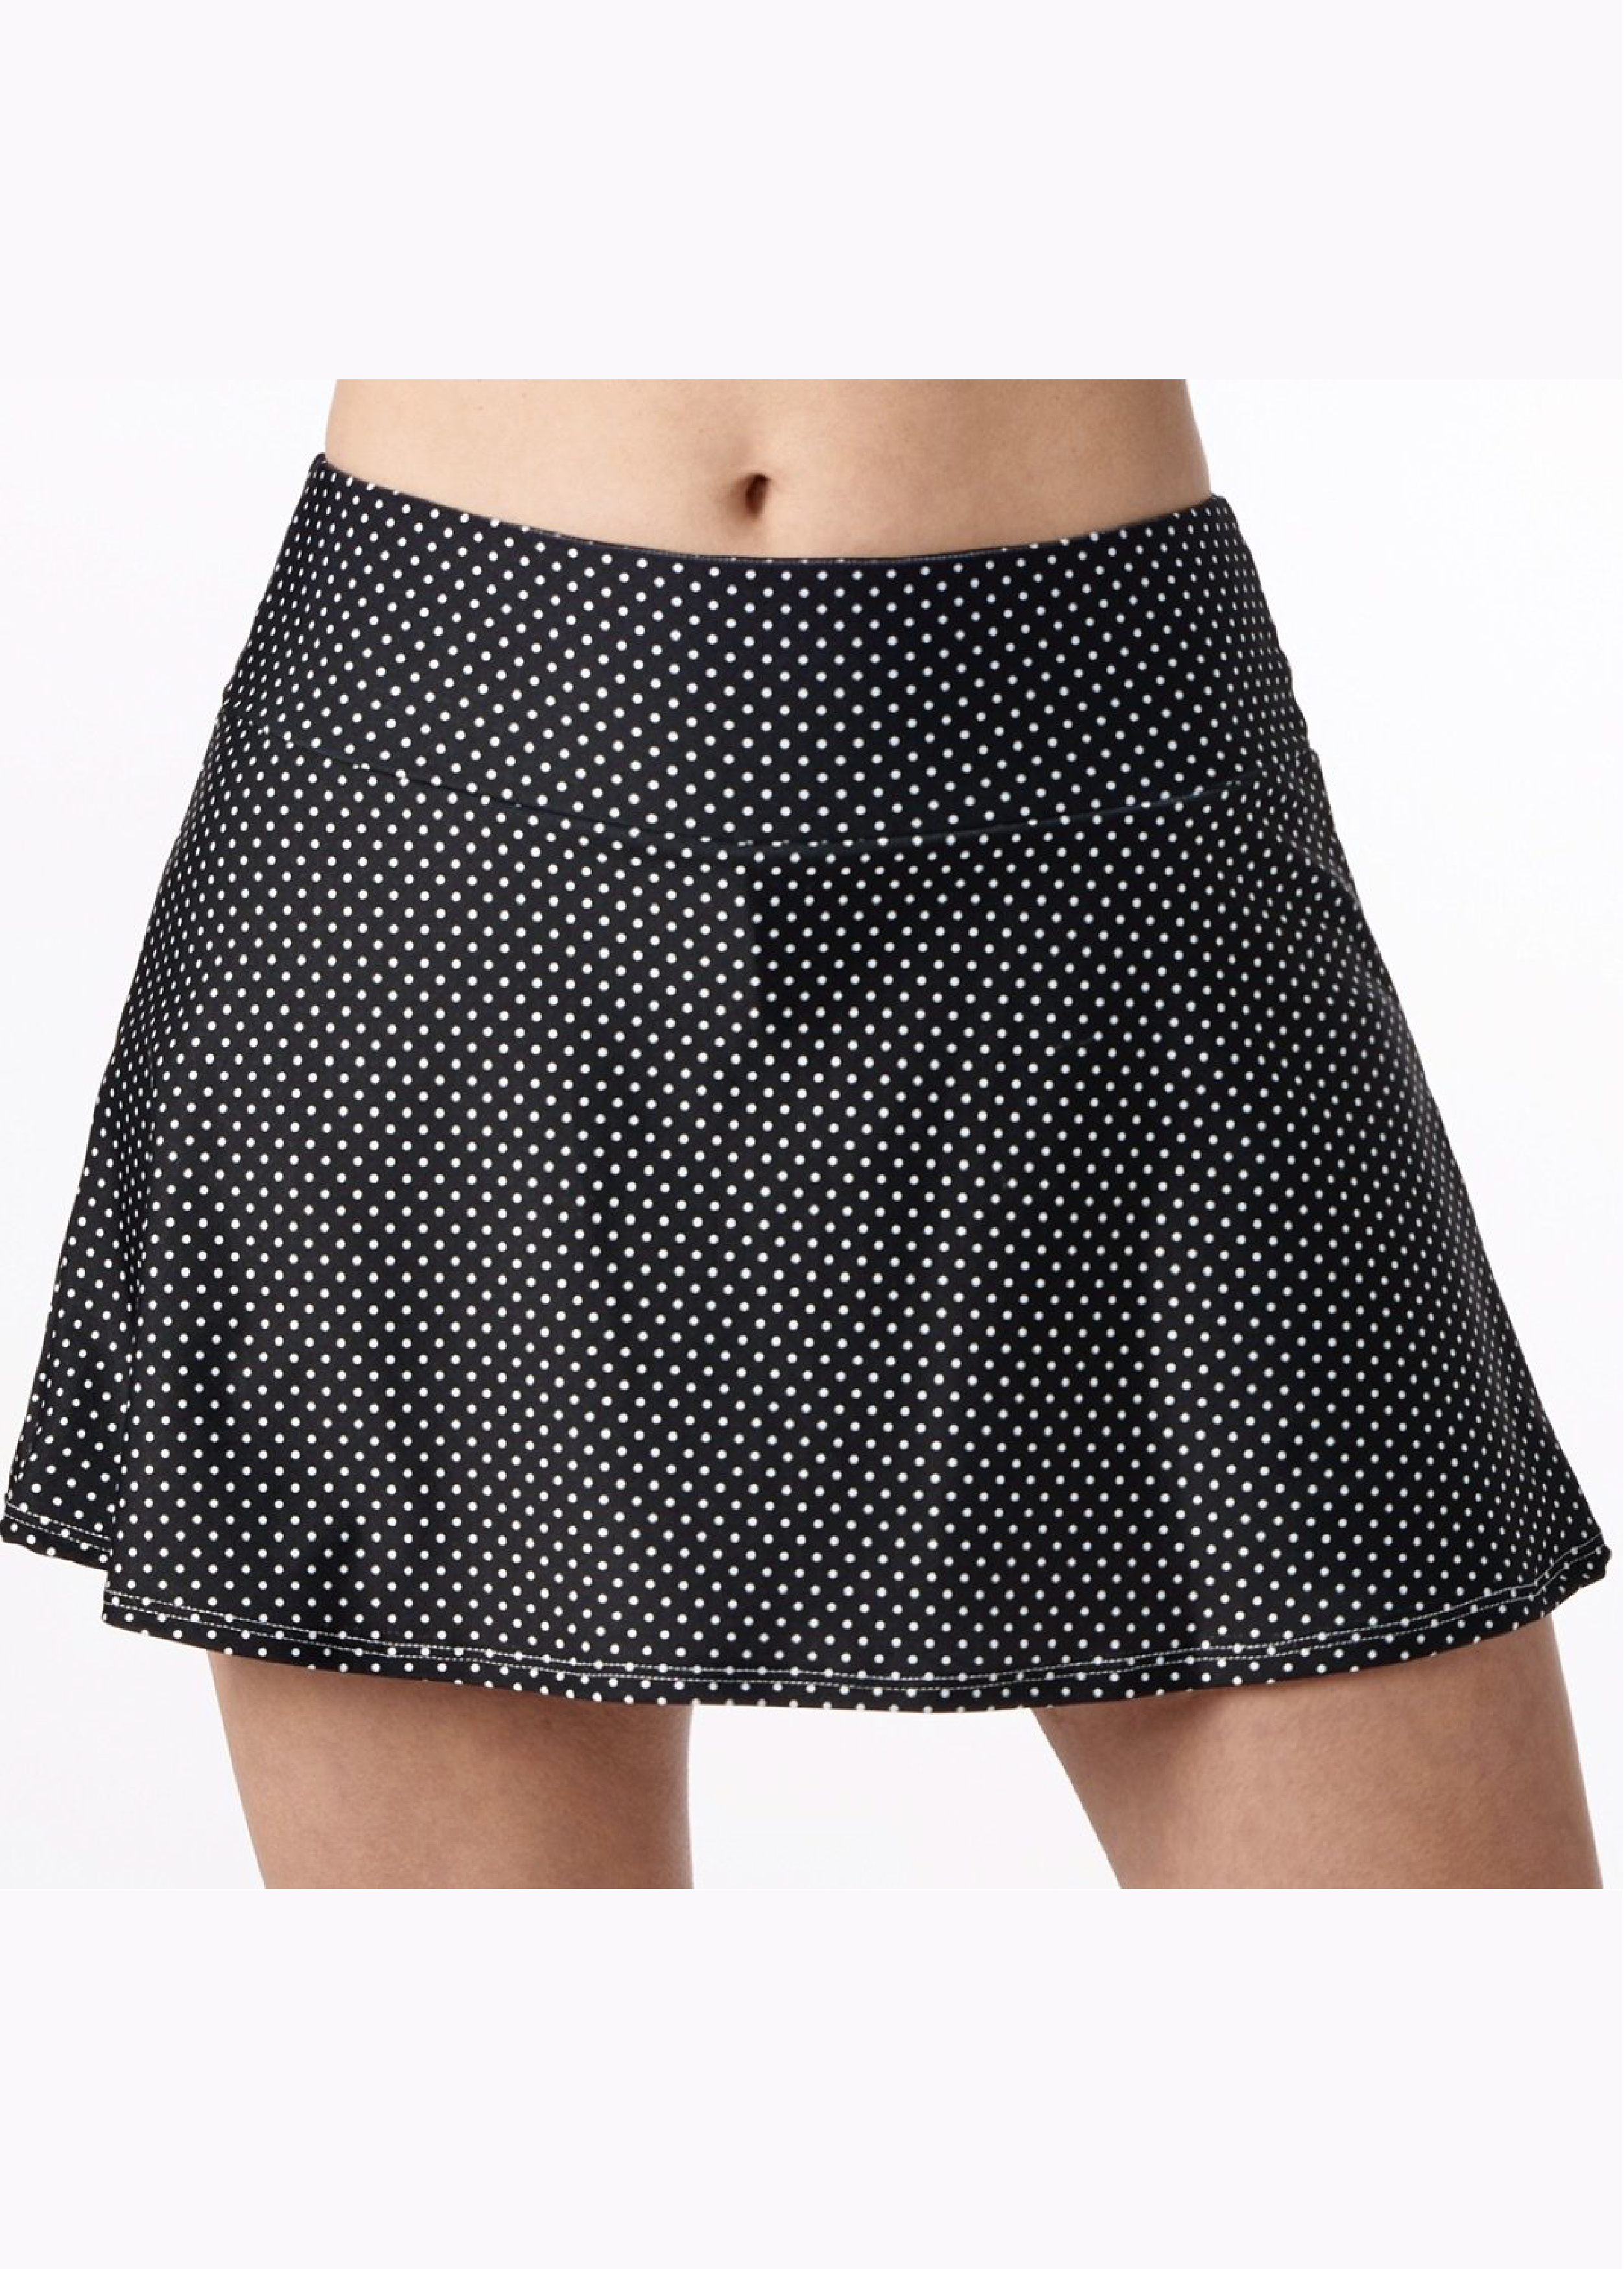 Polka Dot Tennis Skirt with Pink Shorts – Queen of the Court